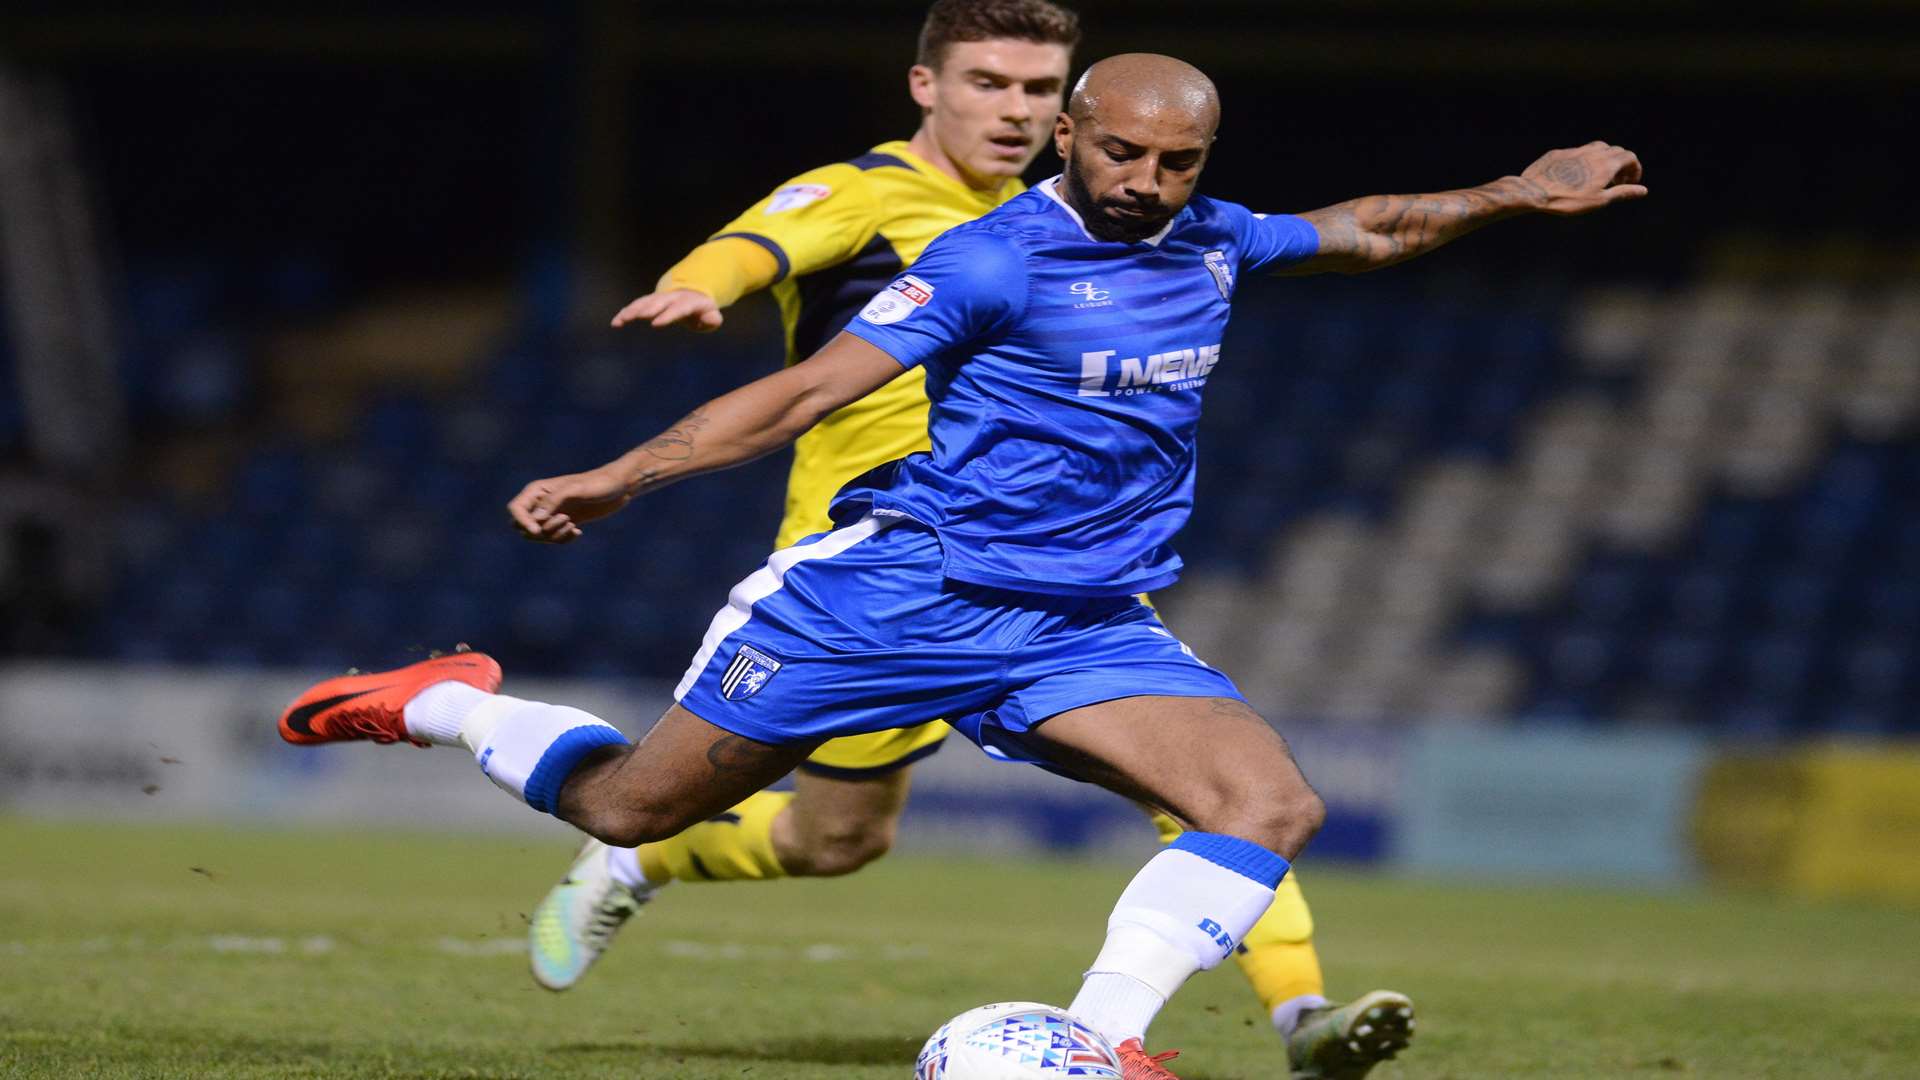 Josh Parker in action for Gills against Oxford on Tuesday night. Picture: Gary Browne